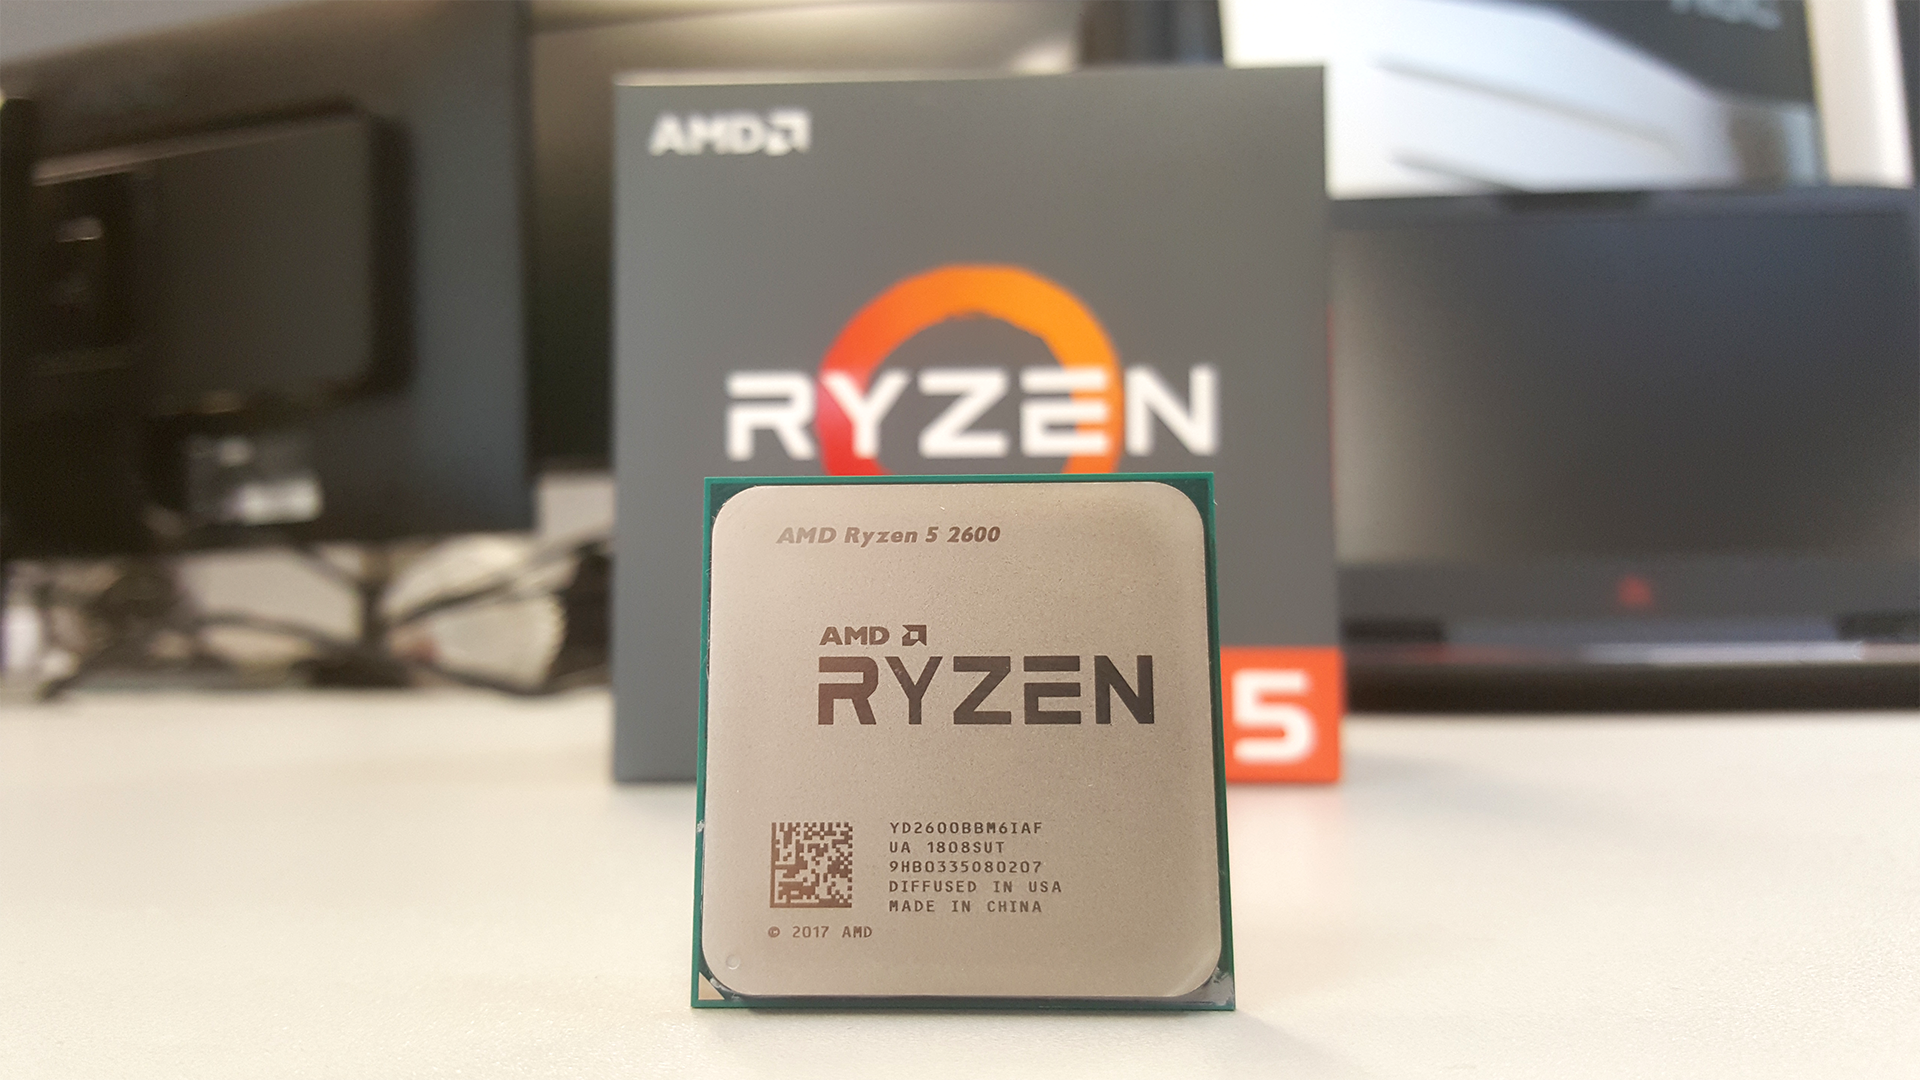 AMD Ryzen 5 2600 review: you won't miss the X from this great